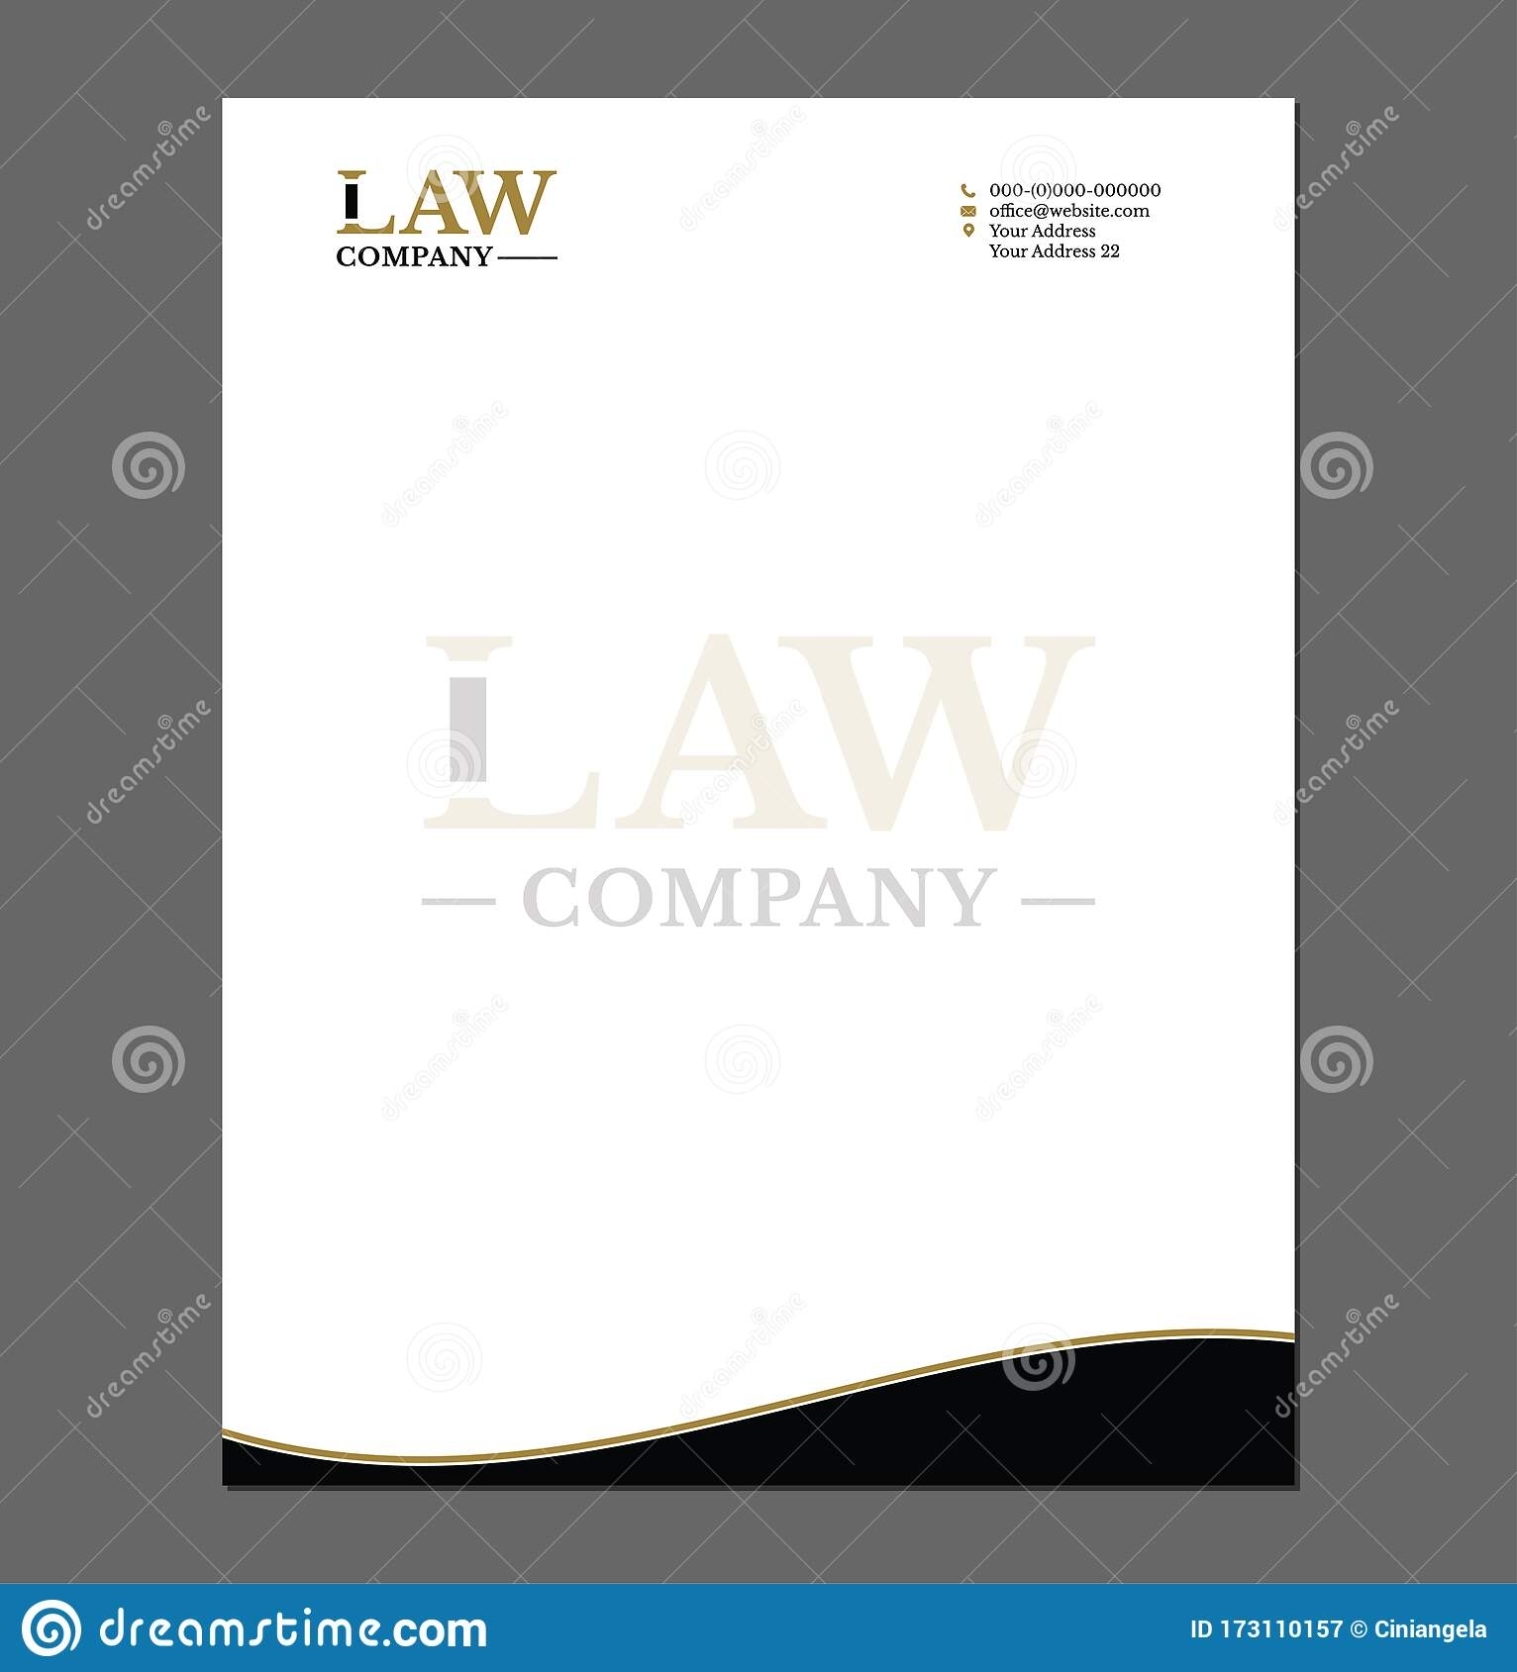 Law Or Attorney Letterhead Template For Print With Logo Stock Vector regarding Letterhead With Logo Template